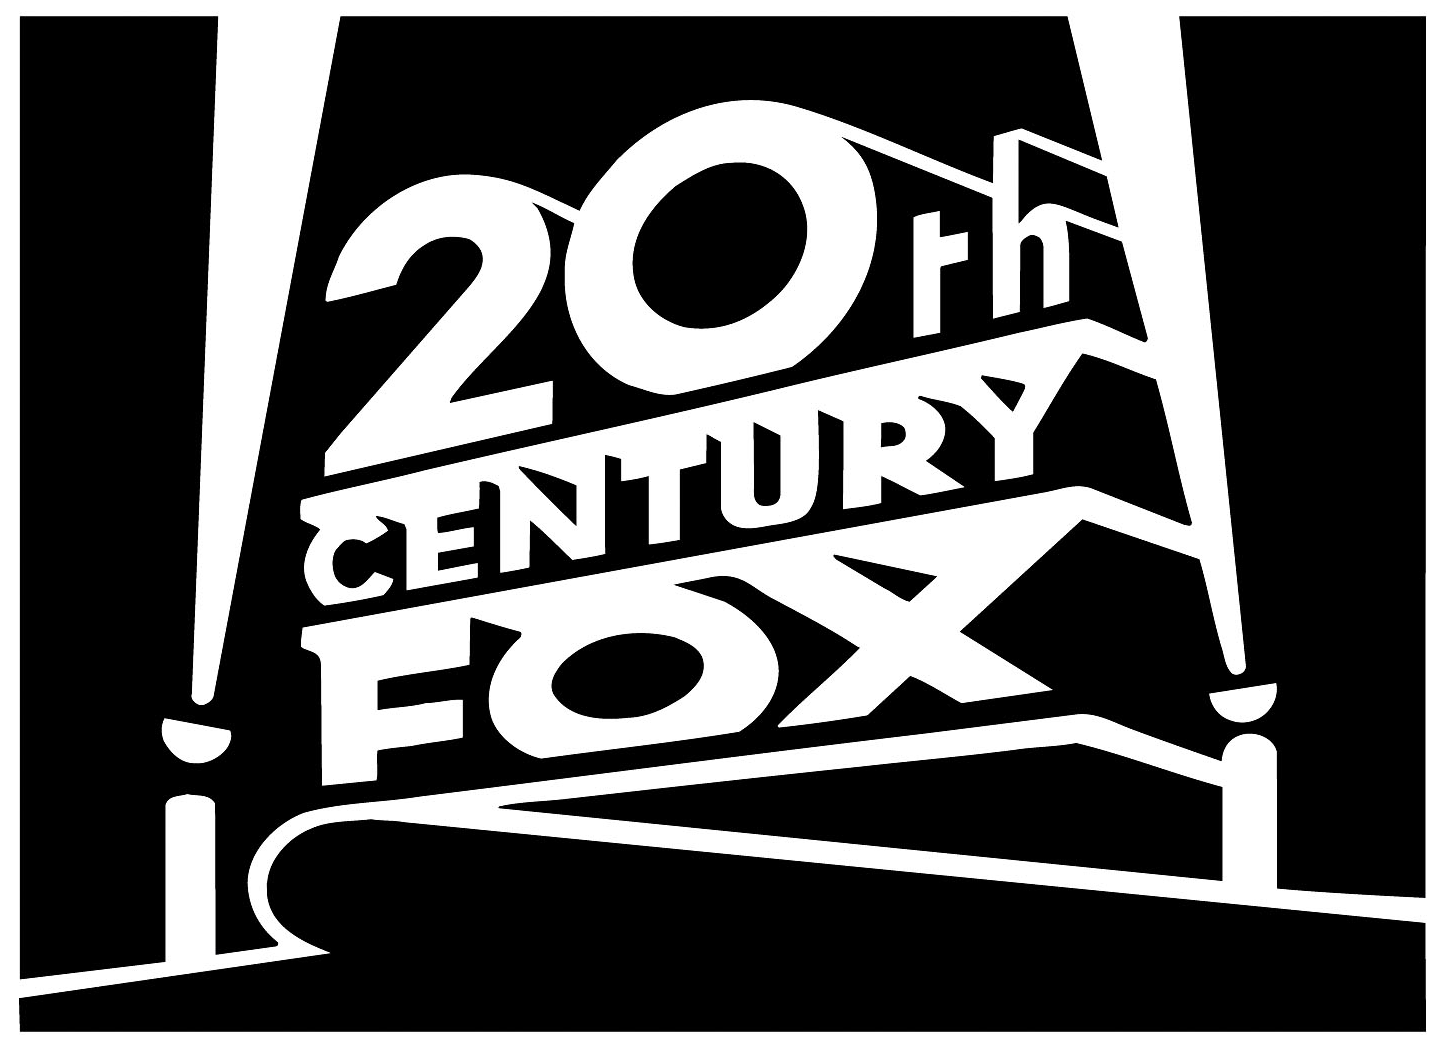 20th-century-fox-logo-black-and-white.png